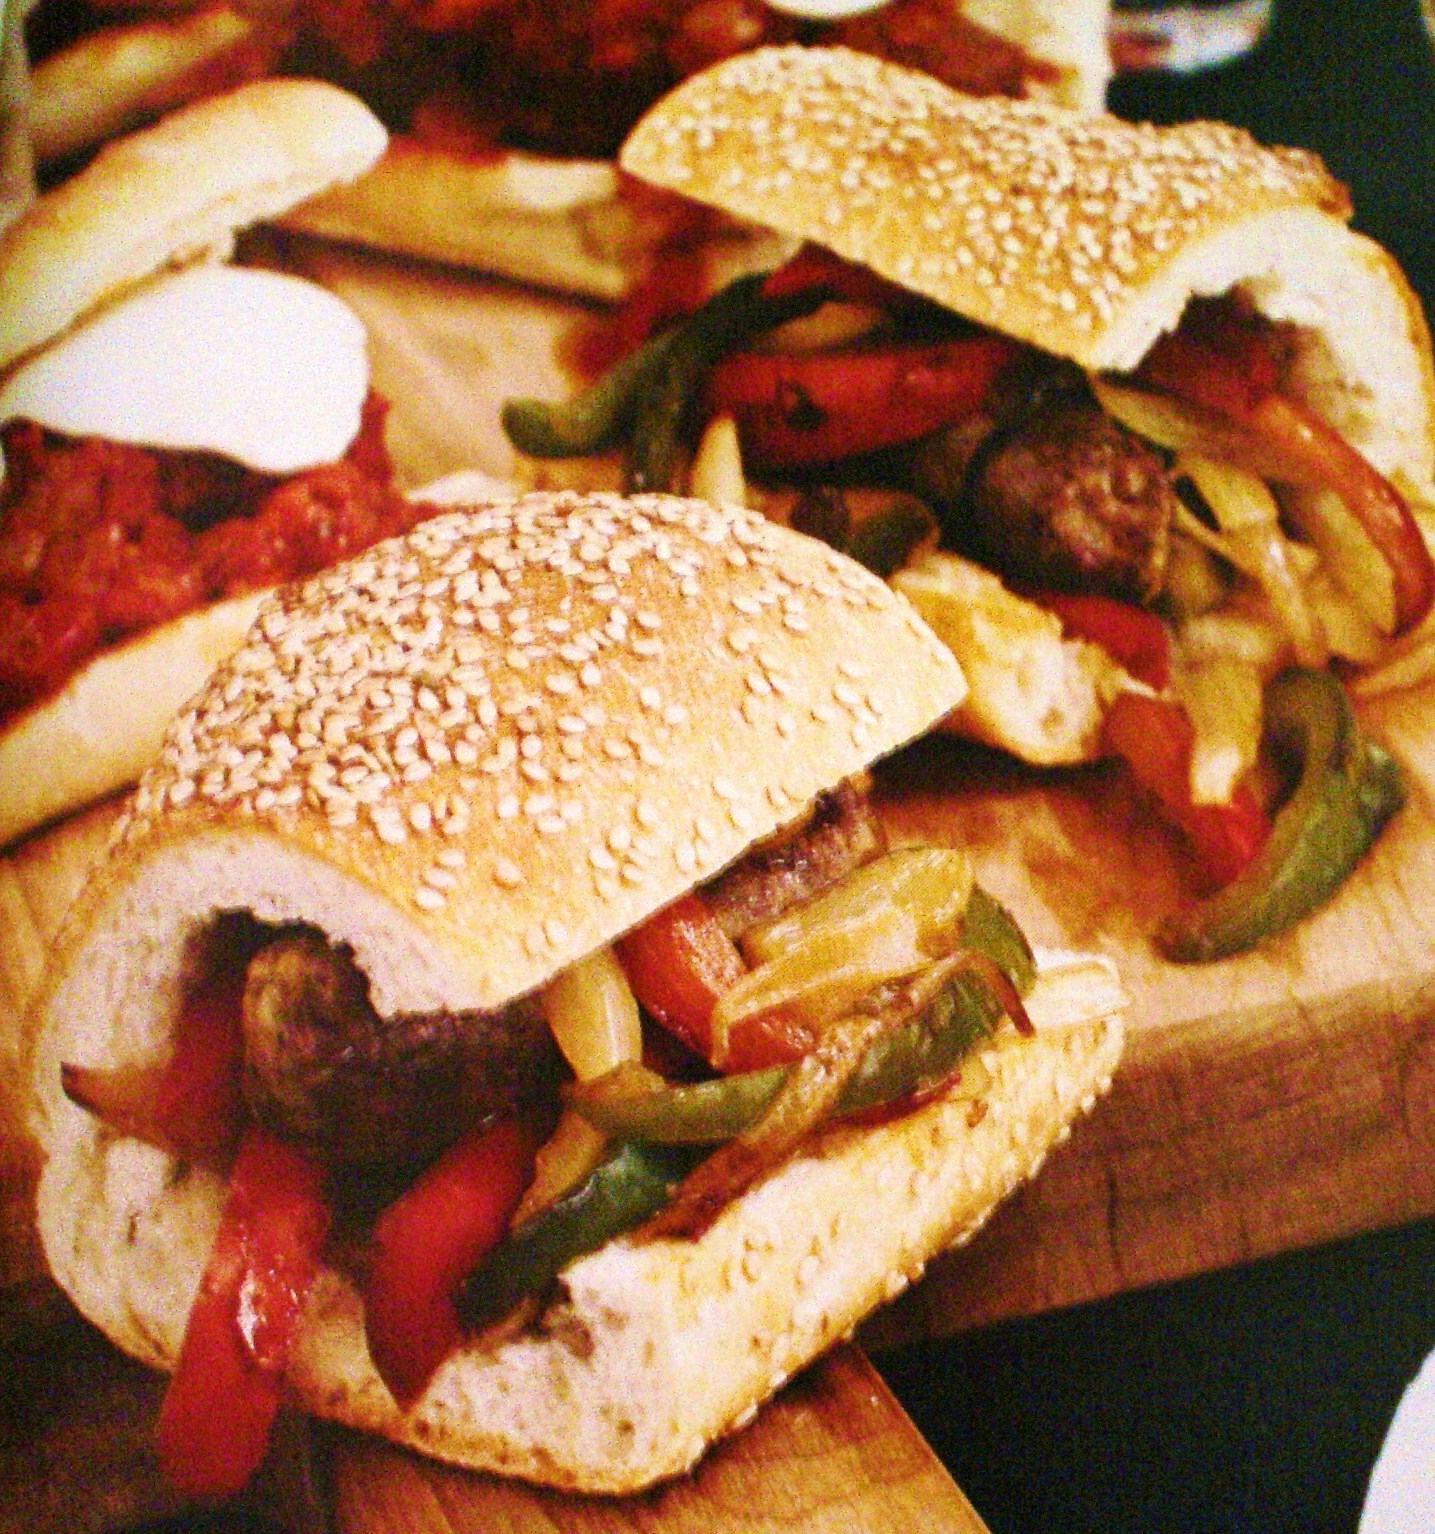 Italian Food images sausage and peppers sub HD wallpaper and ...